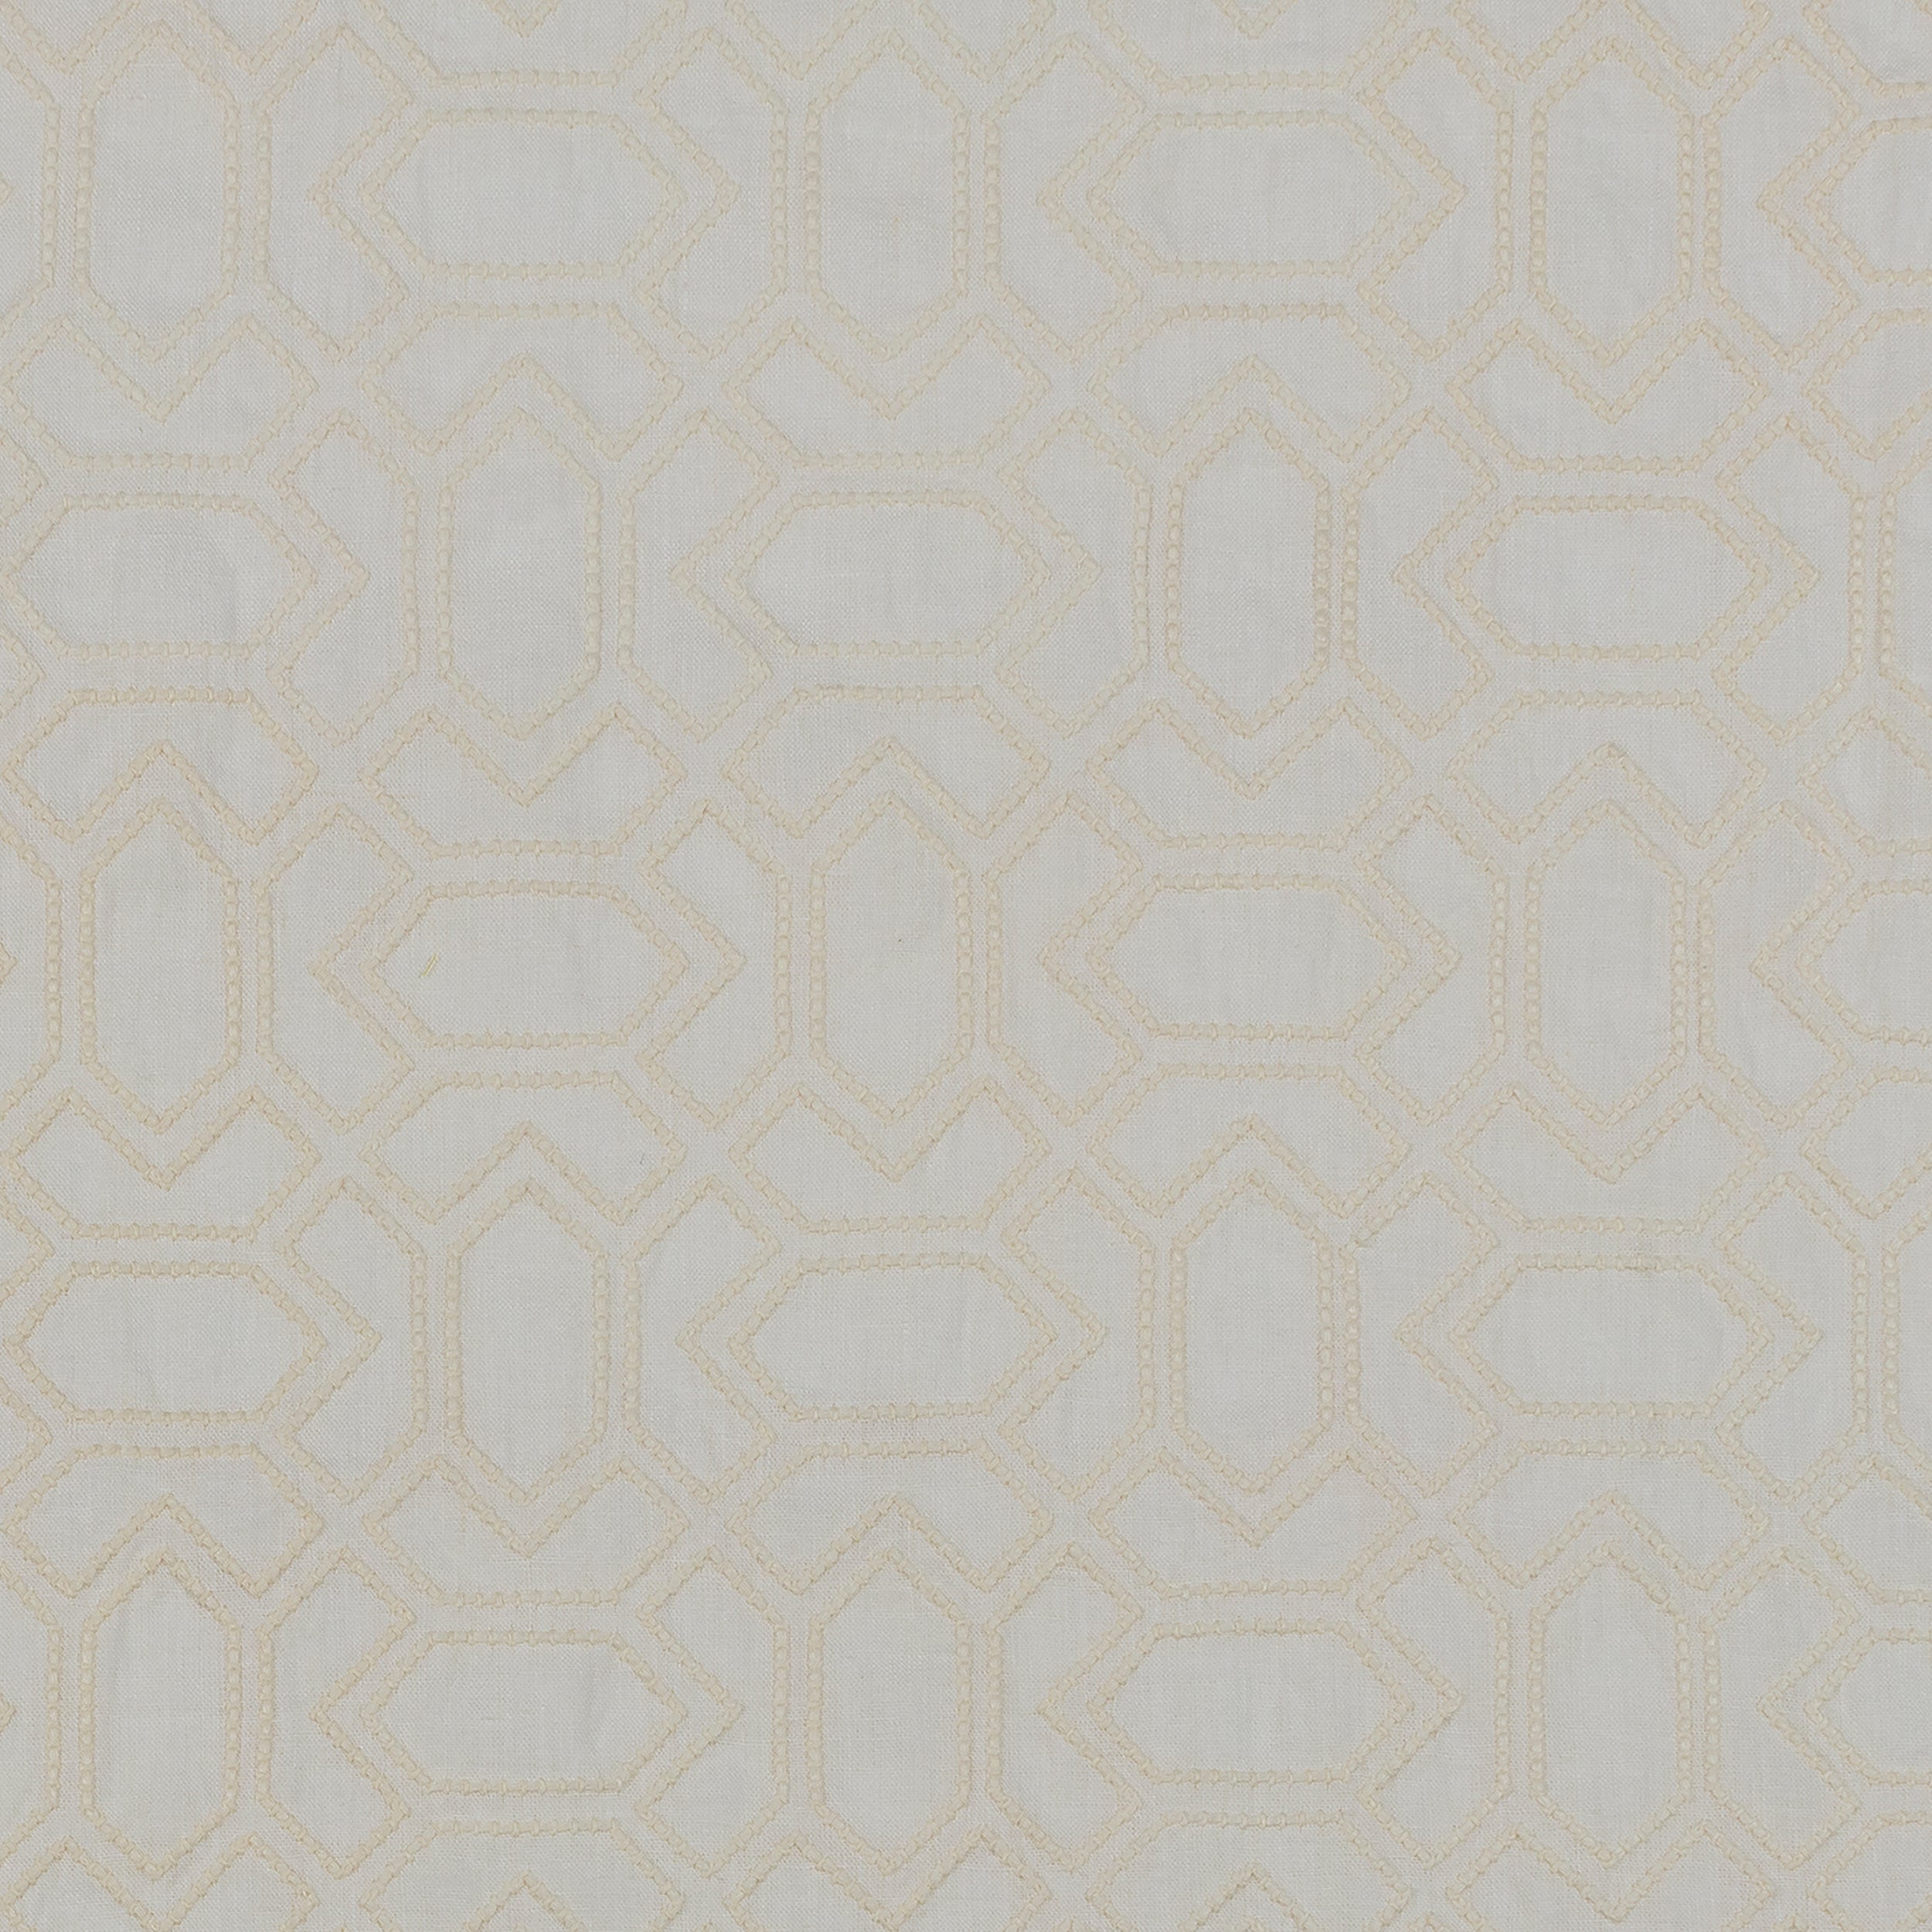 Fabric with an embroidered geometric grid print in cream on a light gray field.